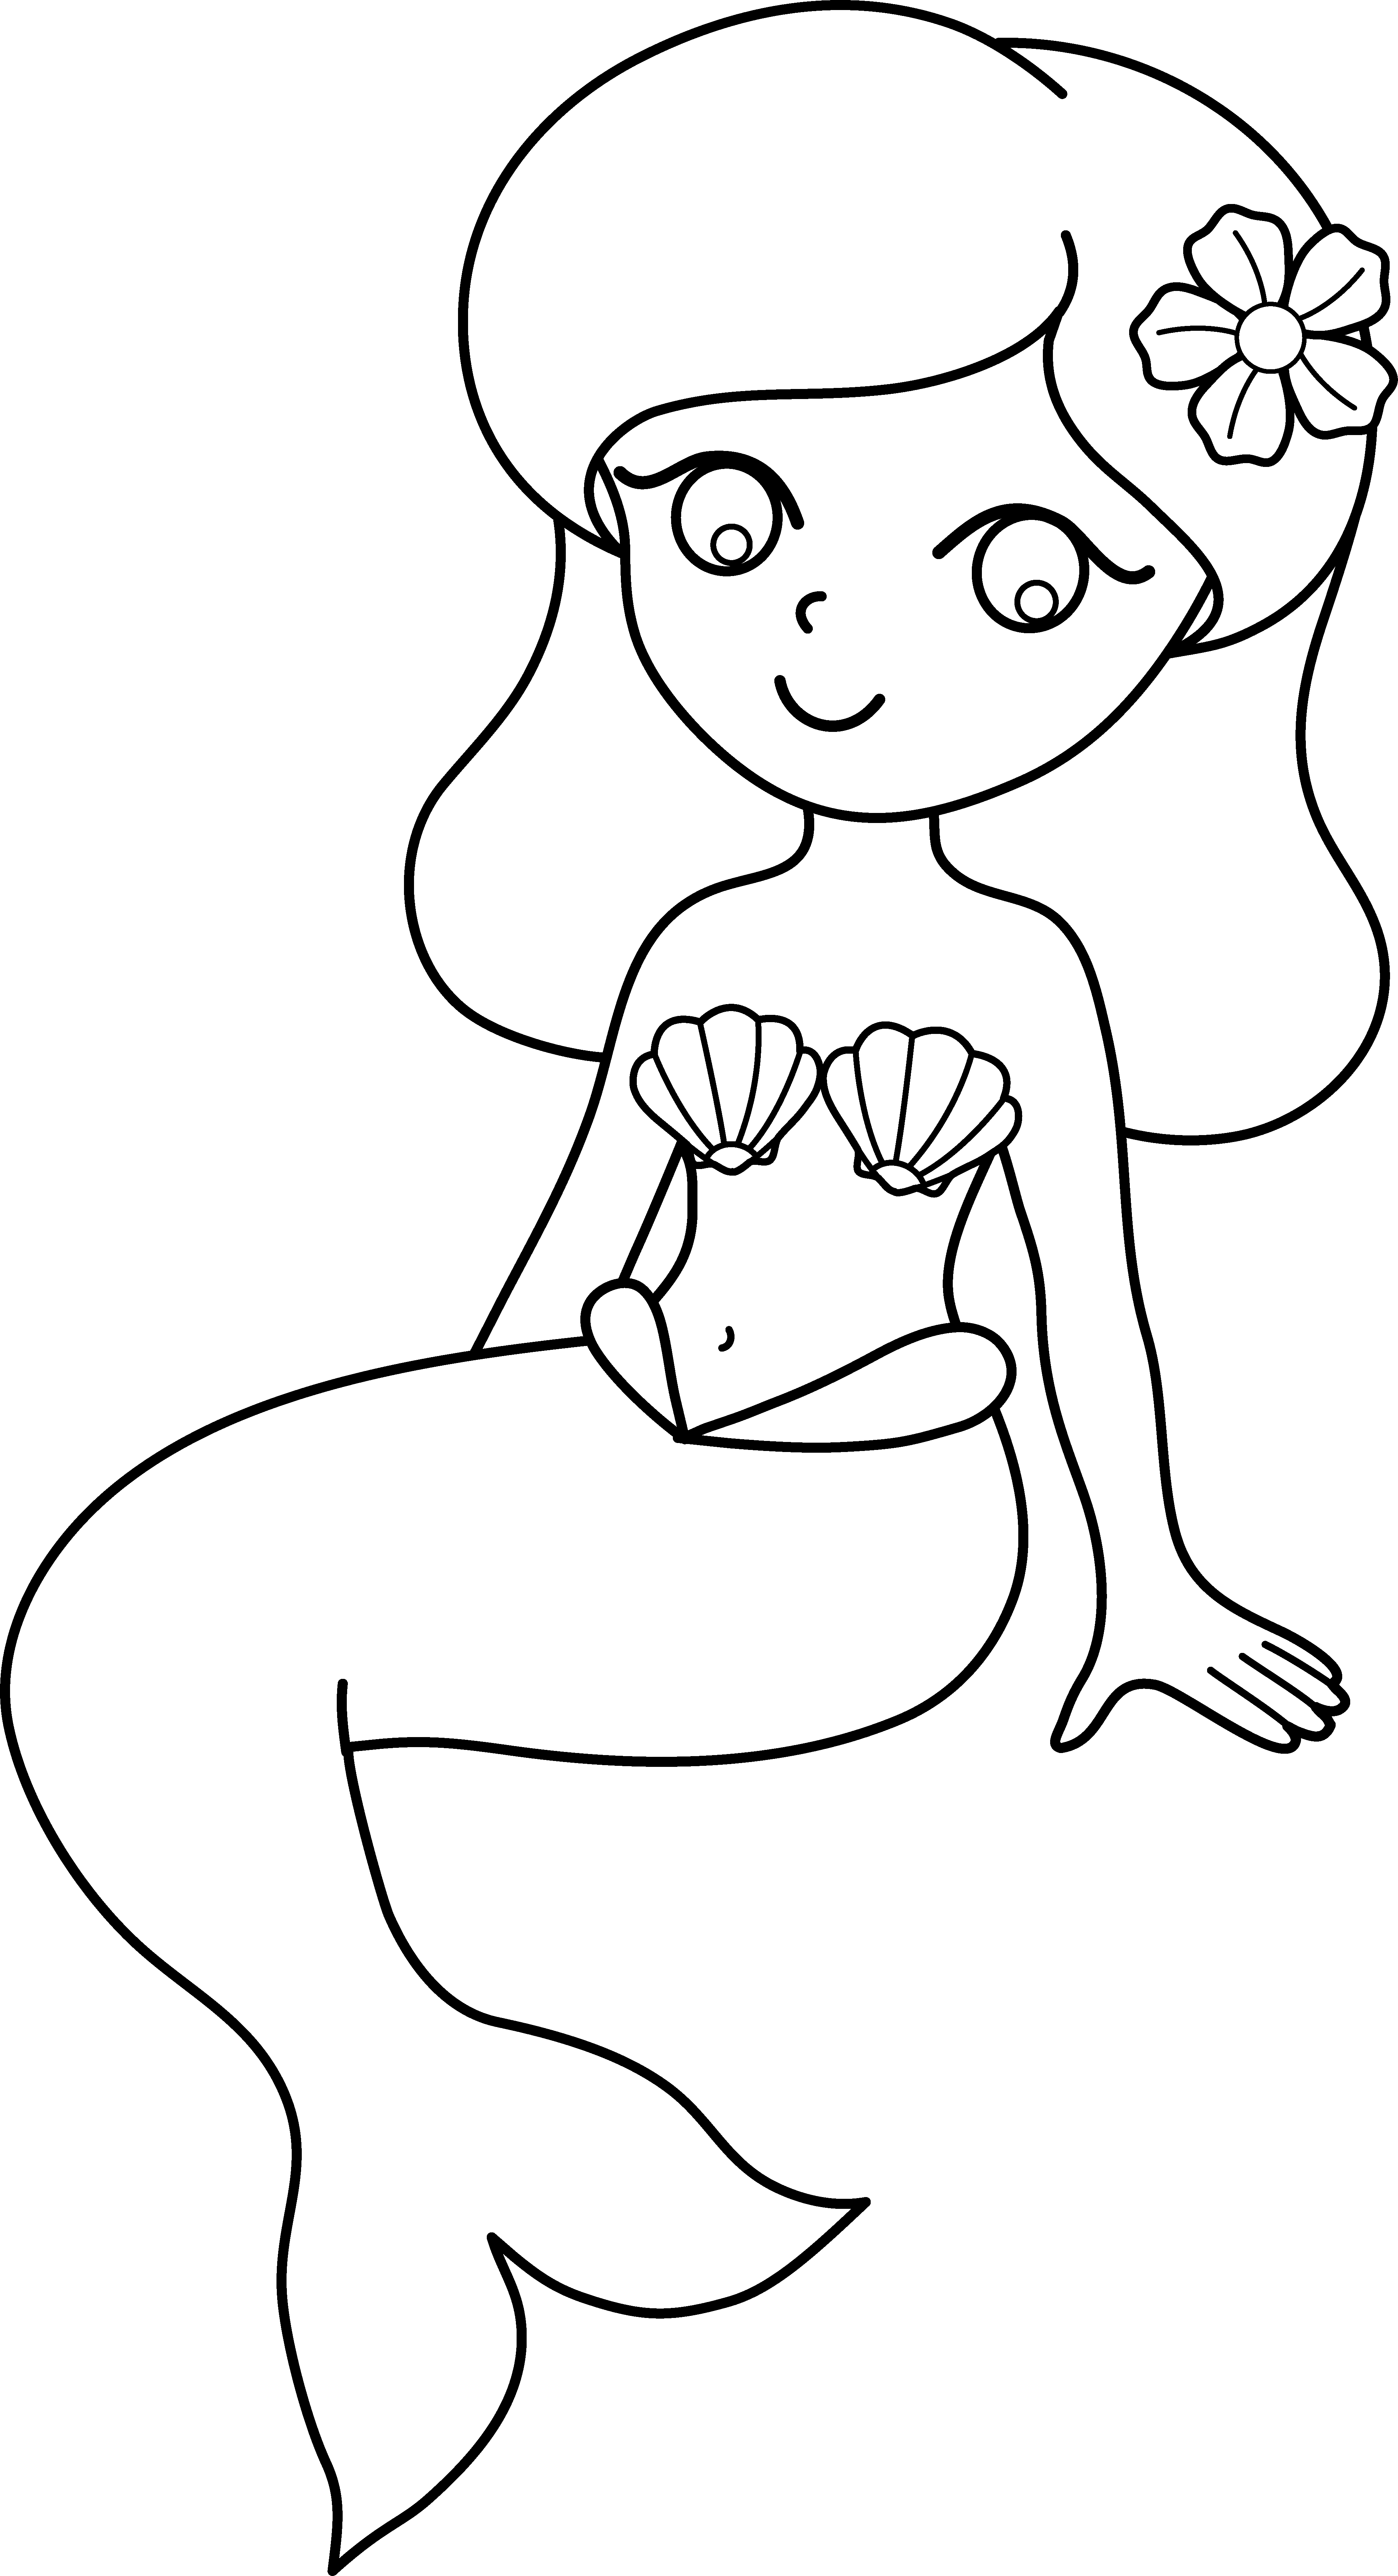 cute colorable mermaid design clip art coloring page id 29679 ...